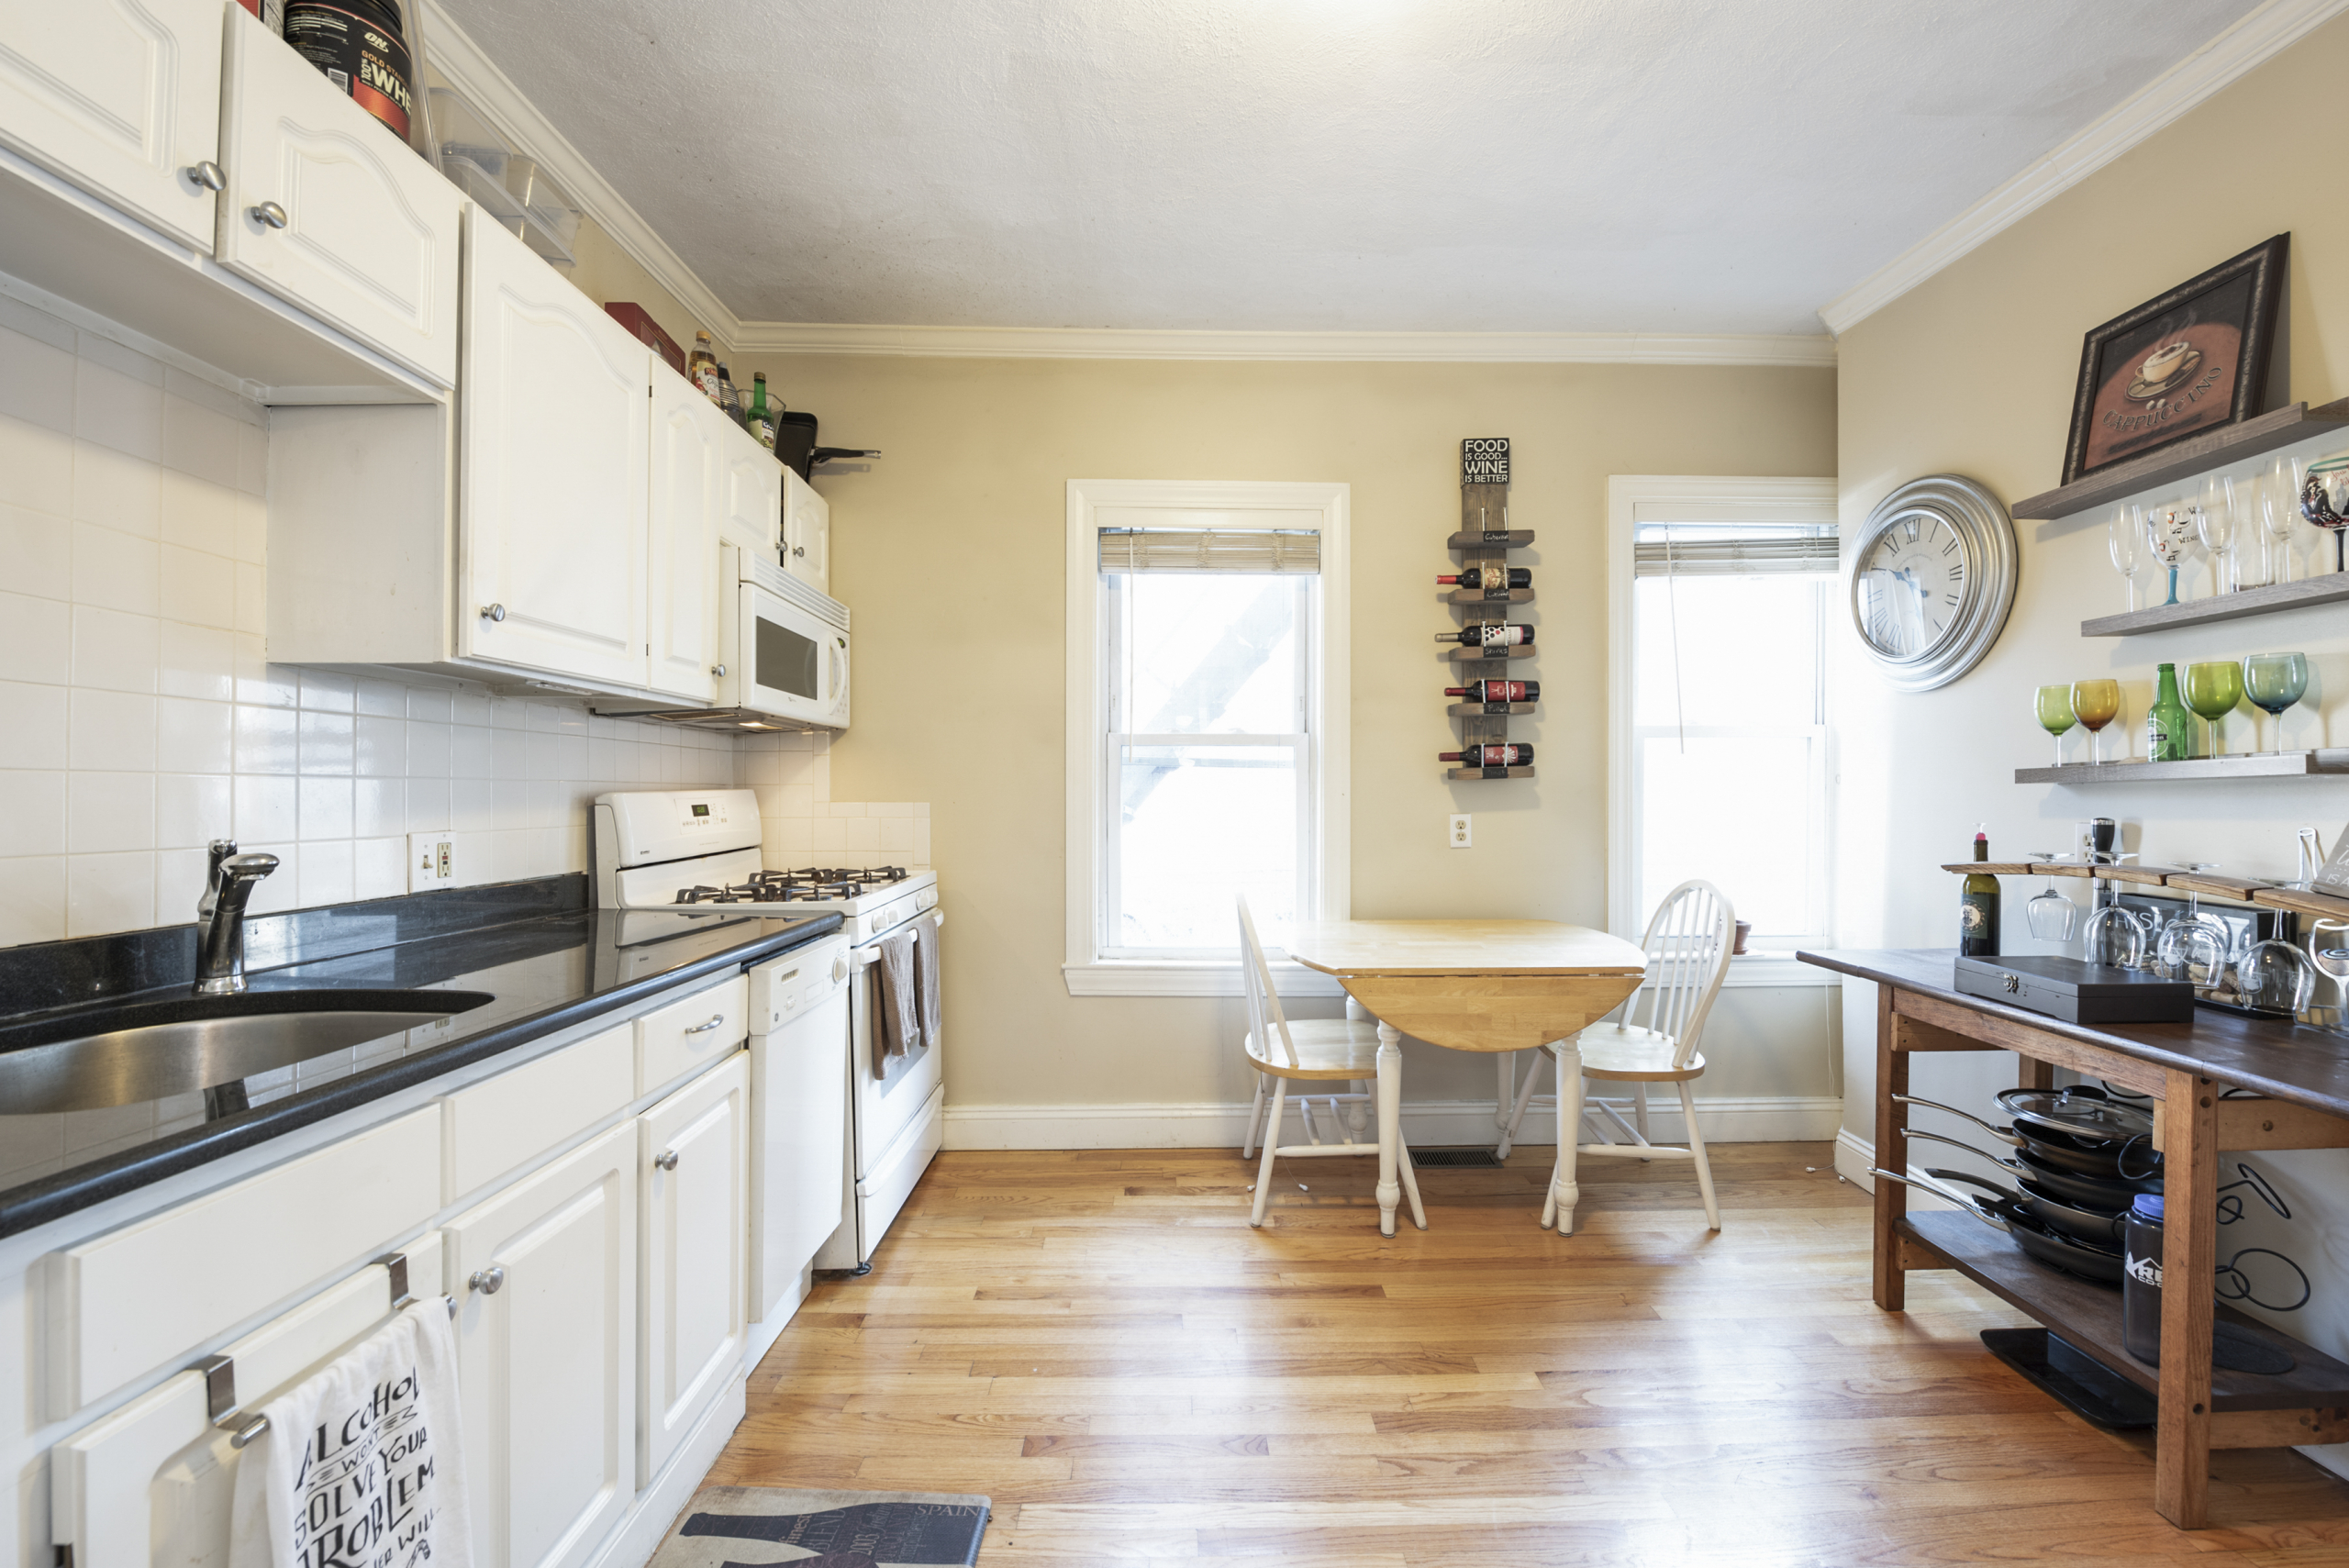 Six Quaint One-Bedroom Condos to Tour in Boston This Weekend